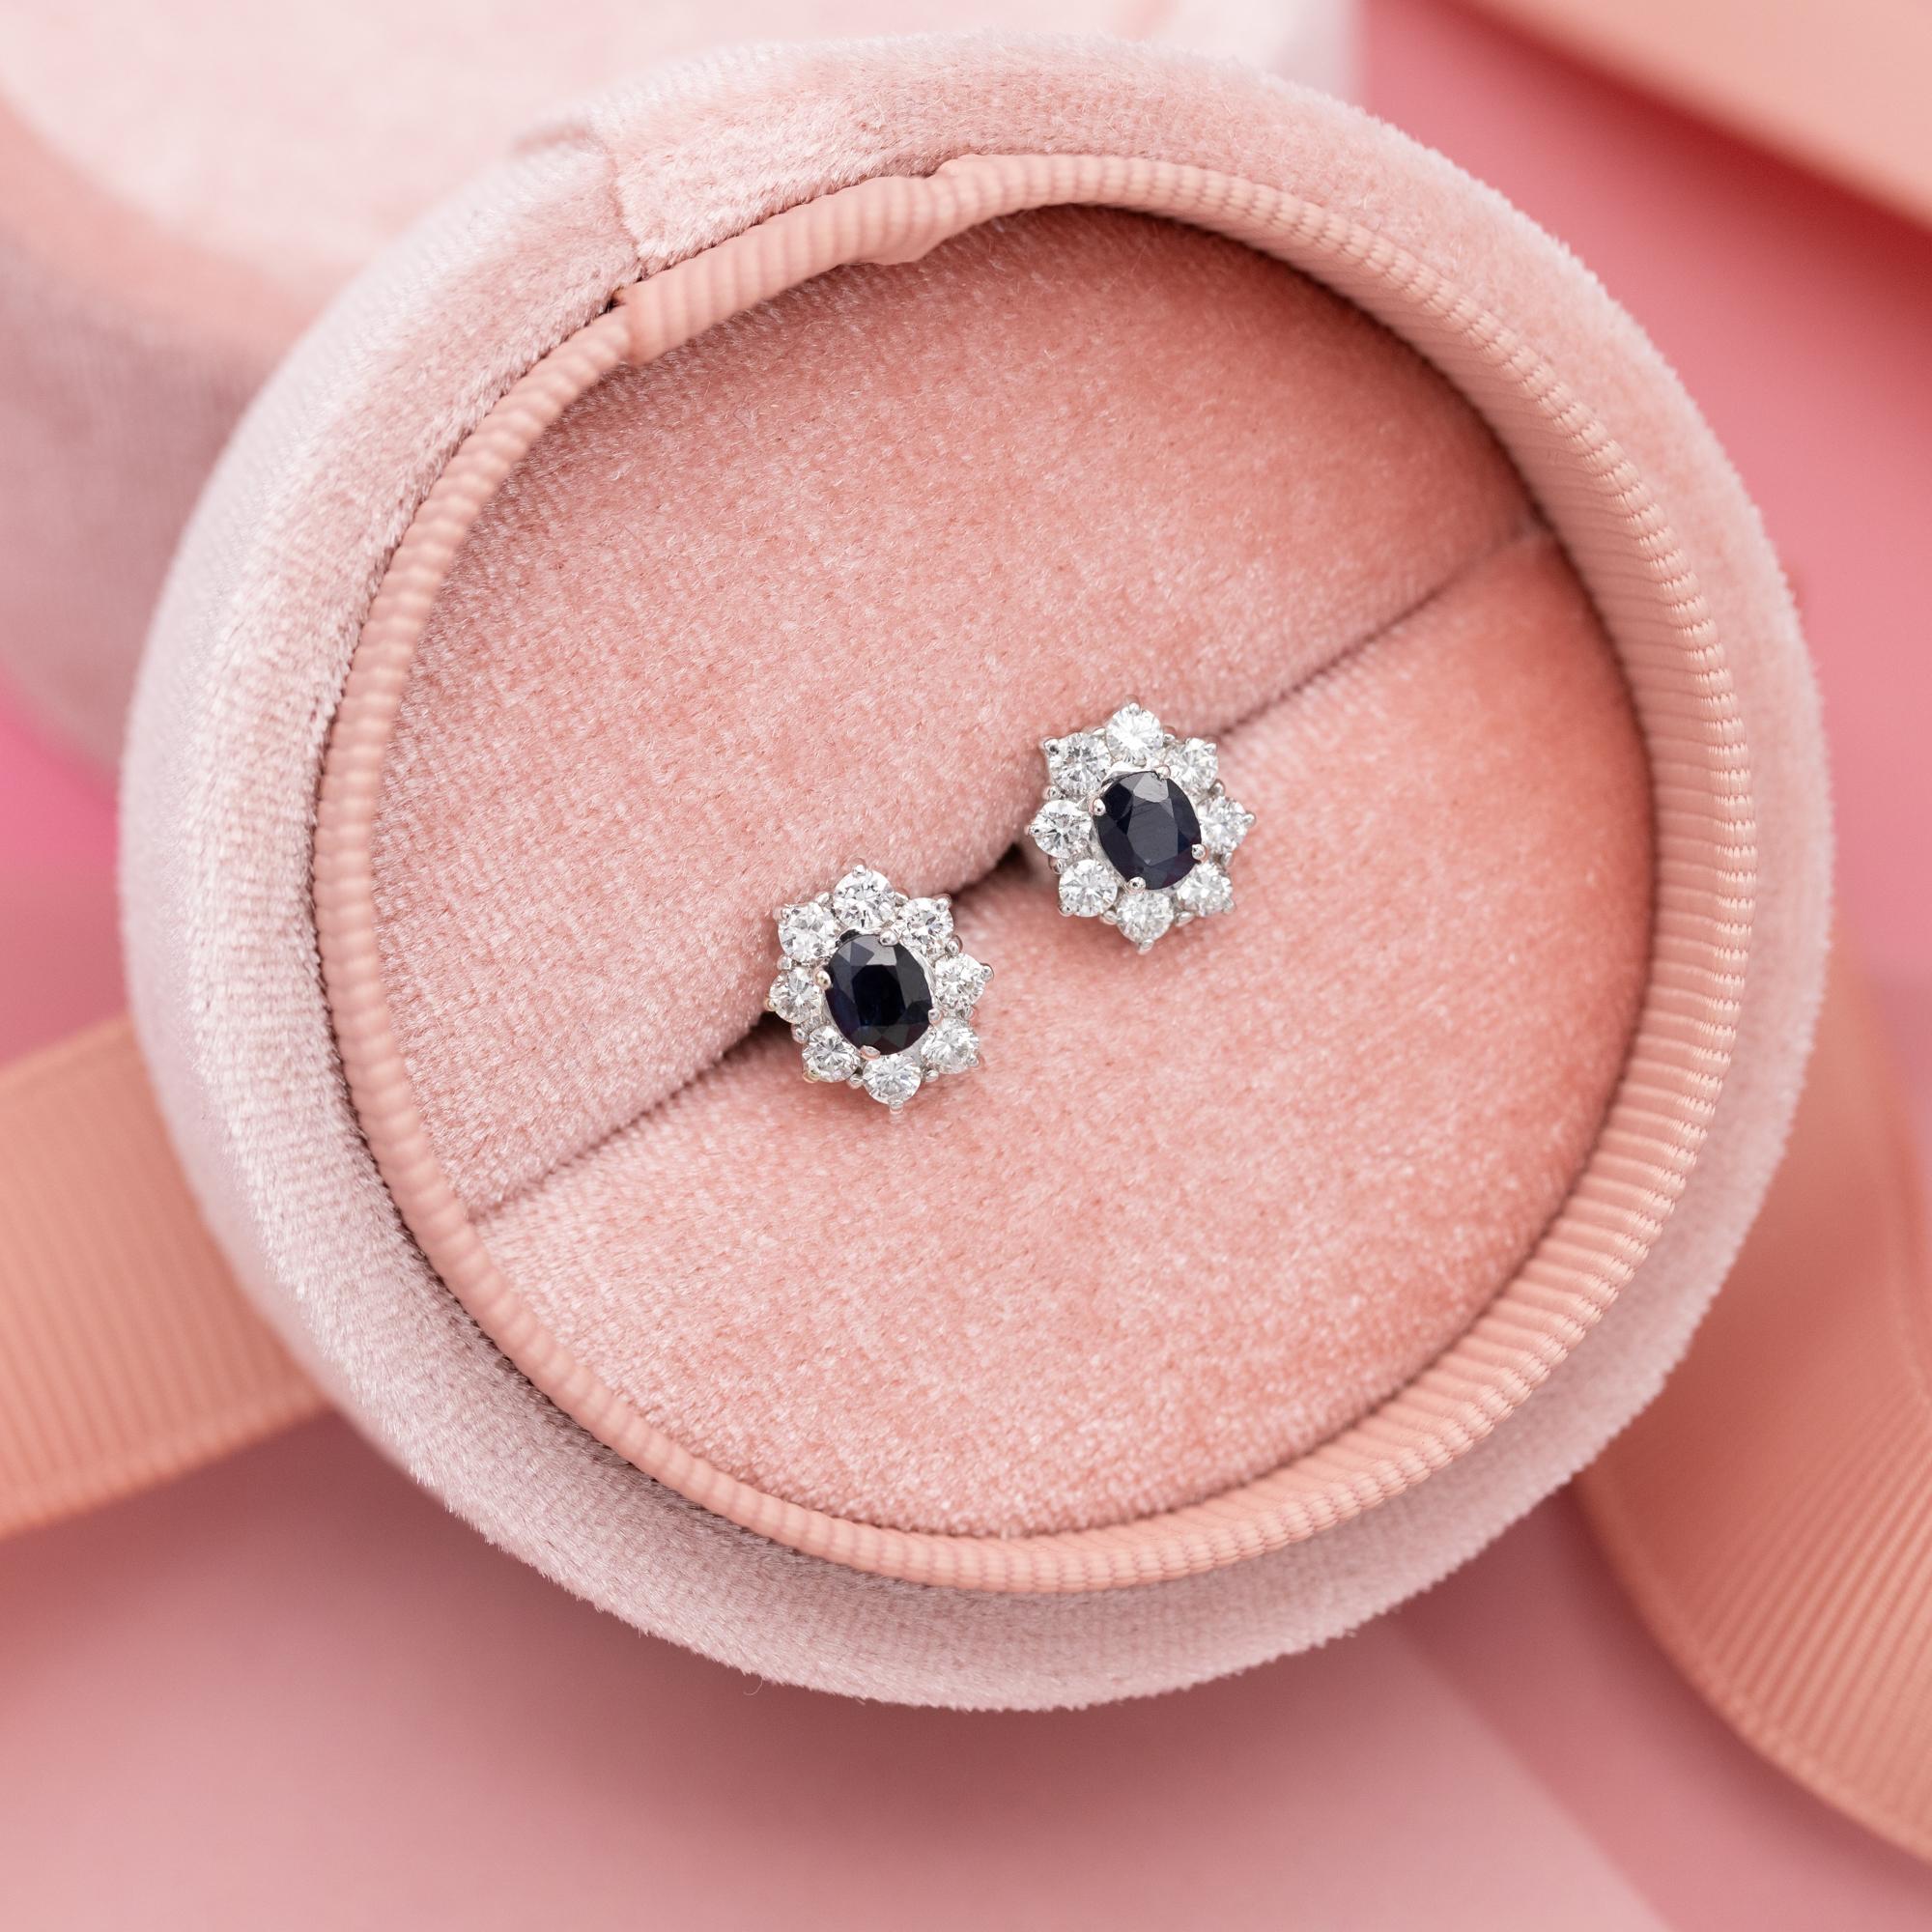 For sale is this 18 K white gold pair of diamond and sapphire earrings. This beautiful pair is set with a total of eighteen brilliant cut diamonds which combine for approximately 0,55ct. They are set in a floral composition in a white gold setting